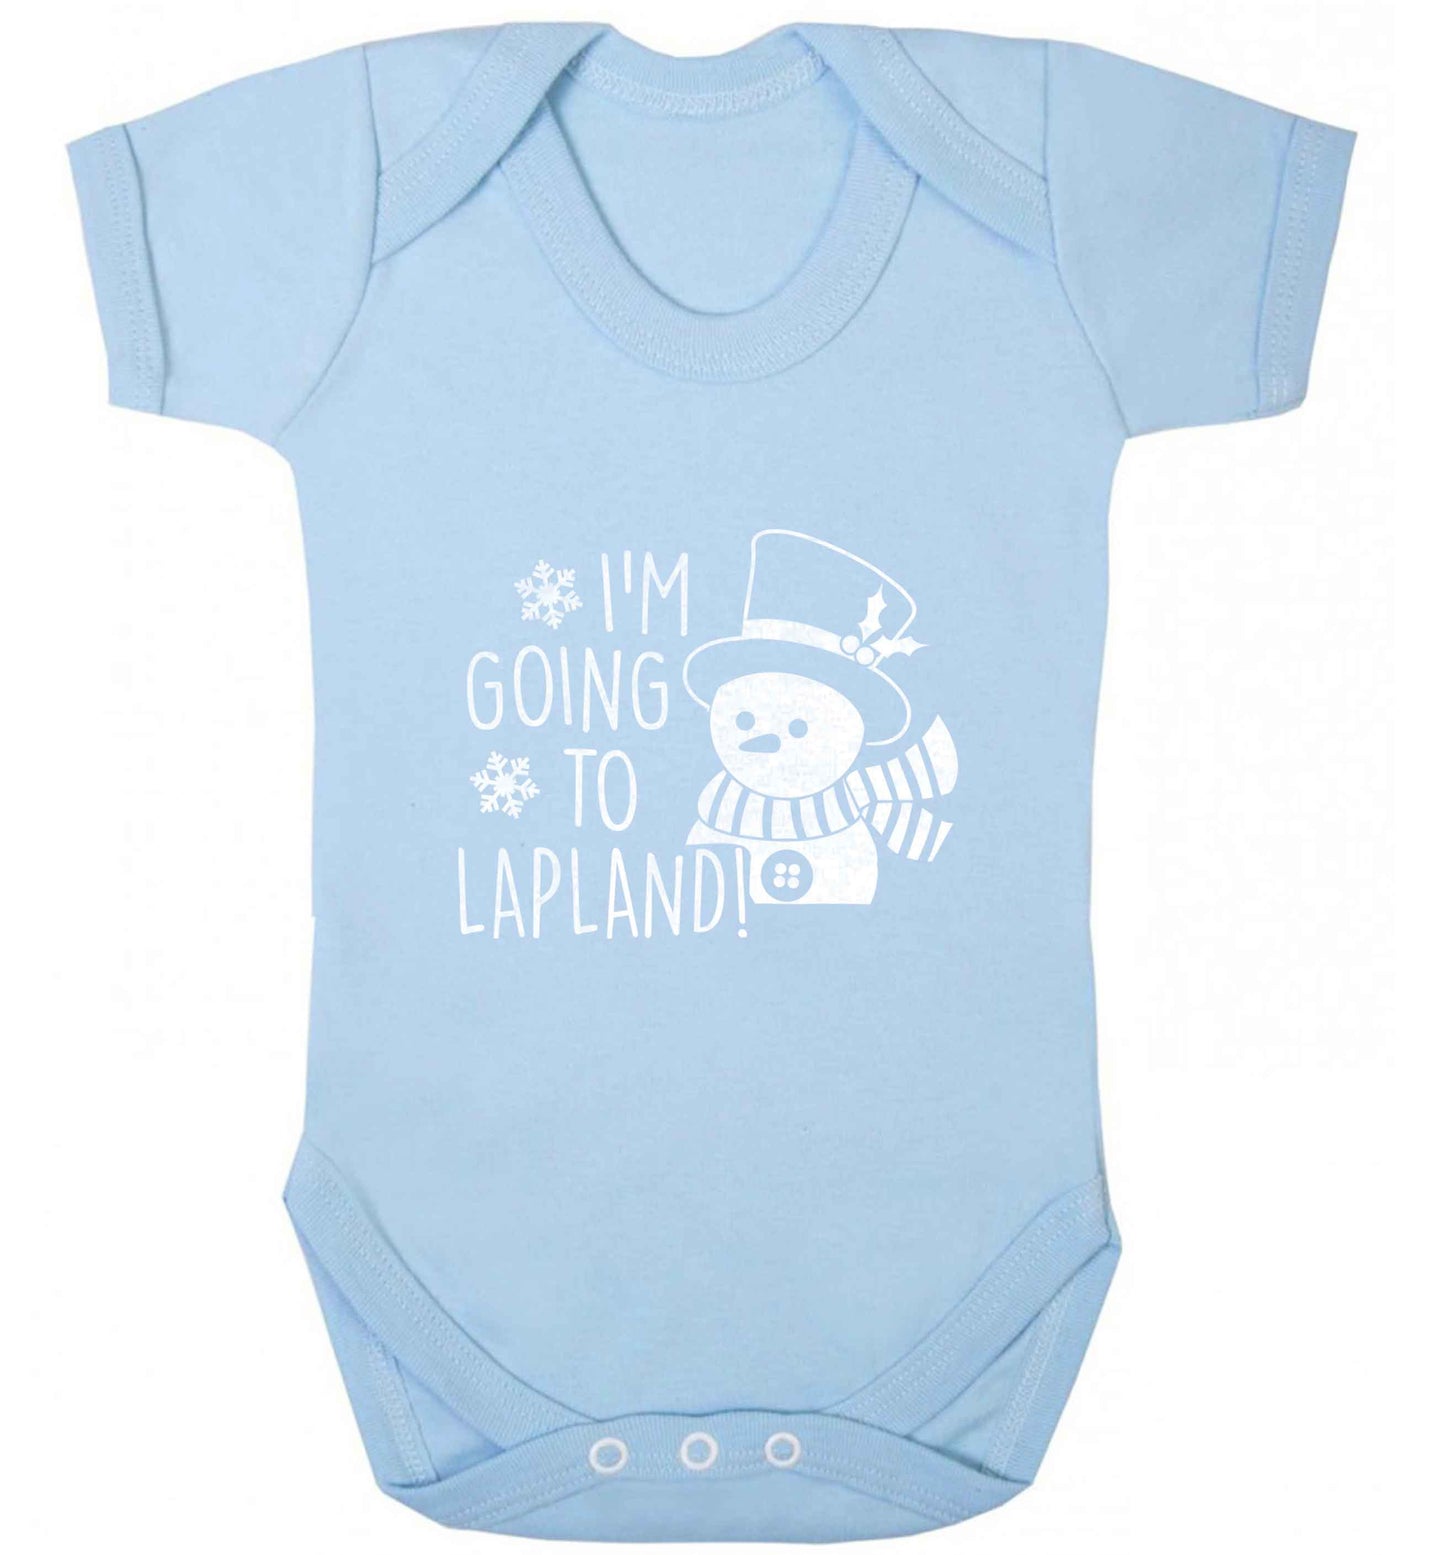 I'm going to Lapland baby vest pale blue 18-24 months